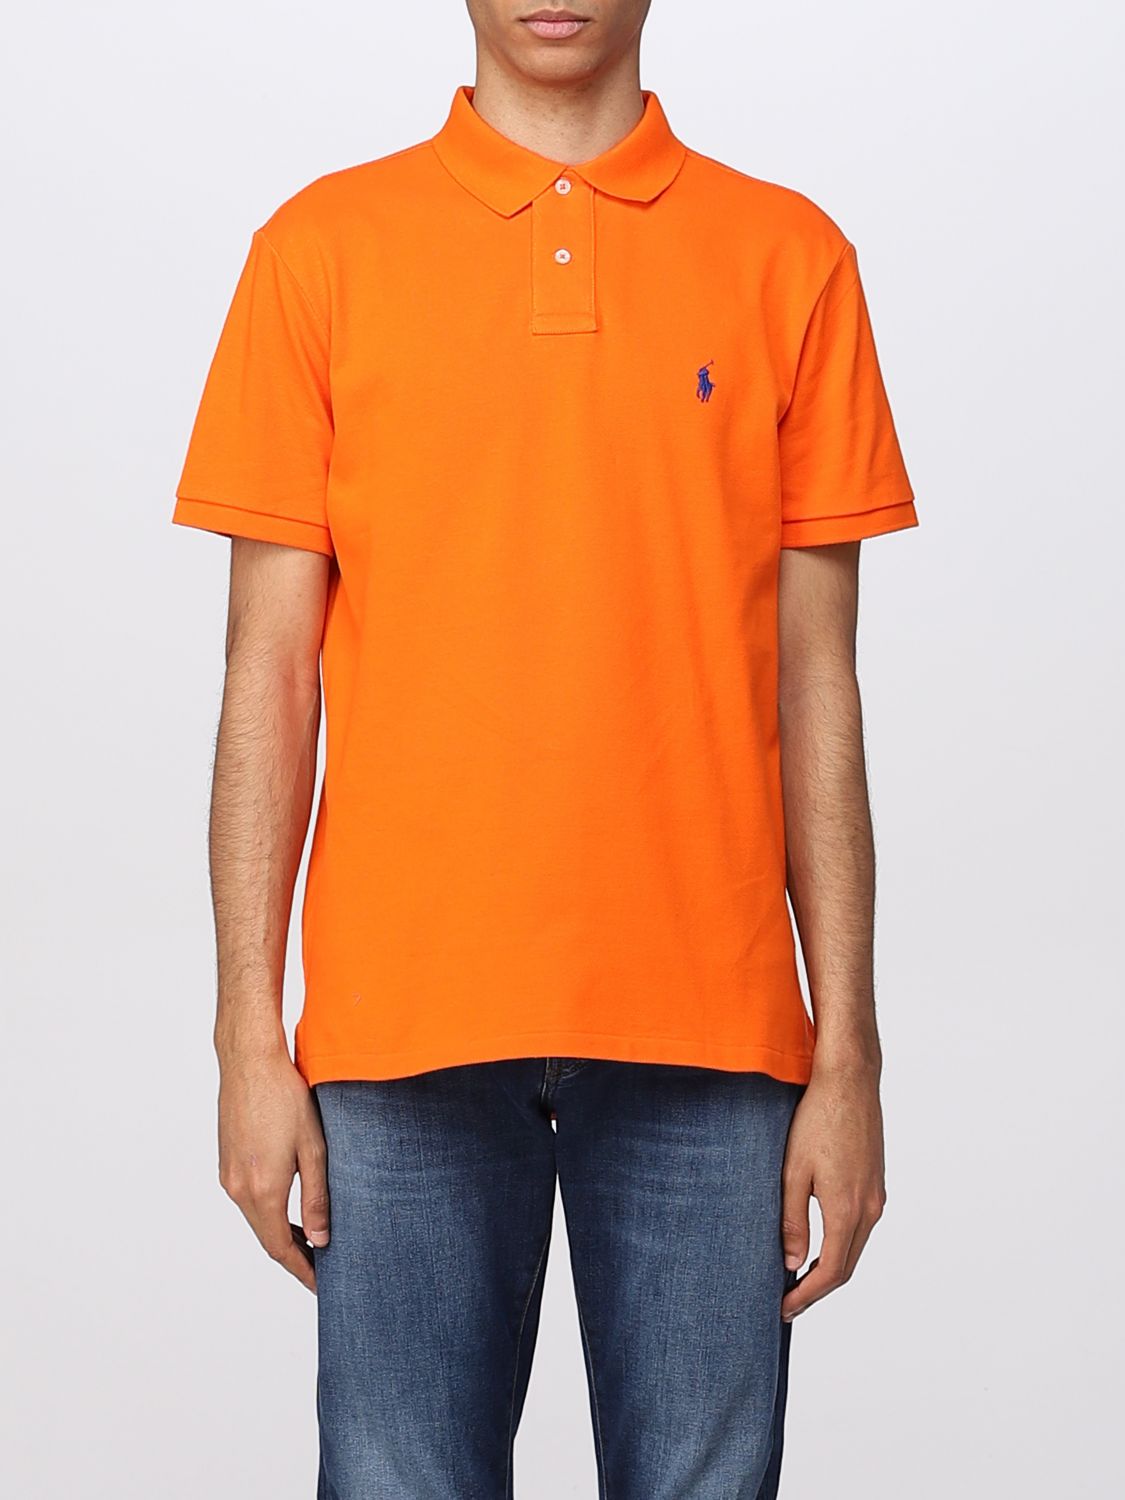 Inwoner Over instelling Bestaan POLO RALPH LAUREN: polo shirt for man - Orange | Polo Ralph Lauren polo  shirt 710795080 online on GIGLIO.COM